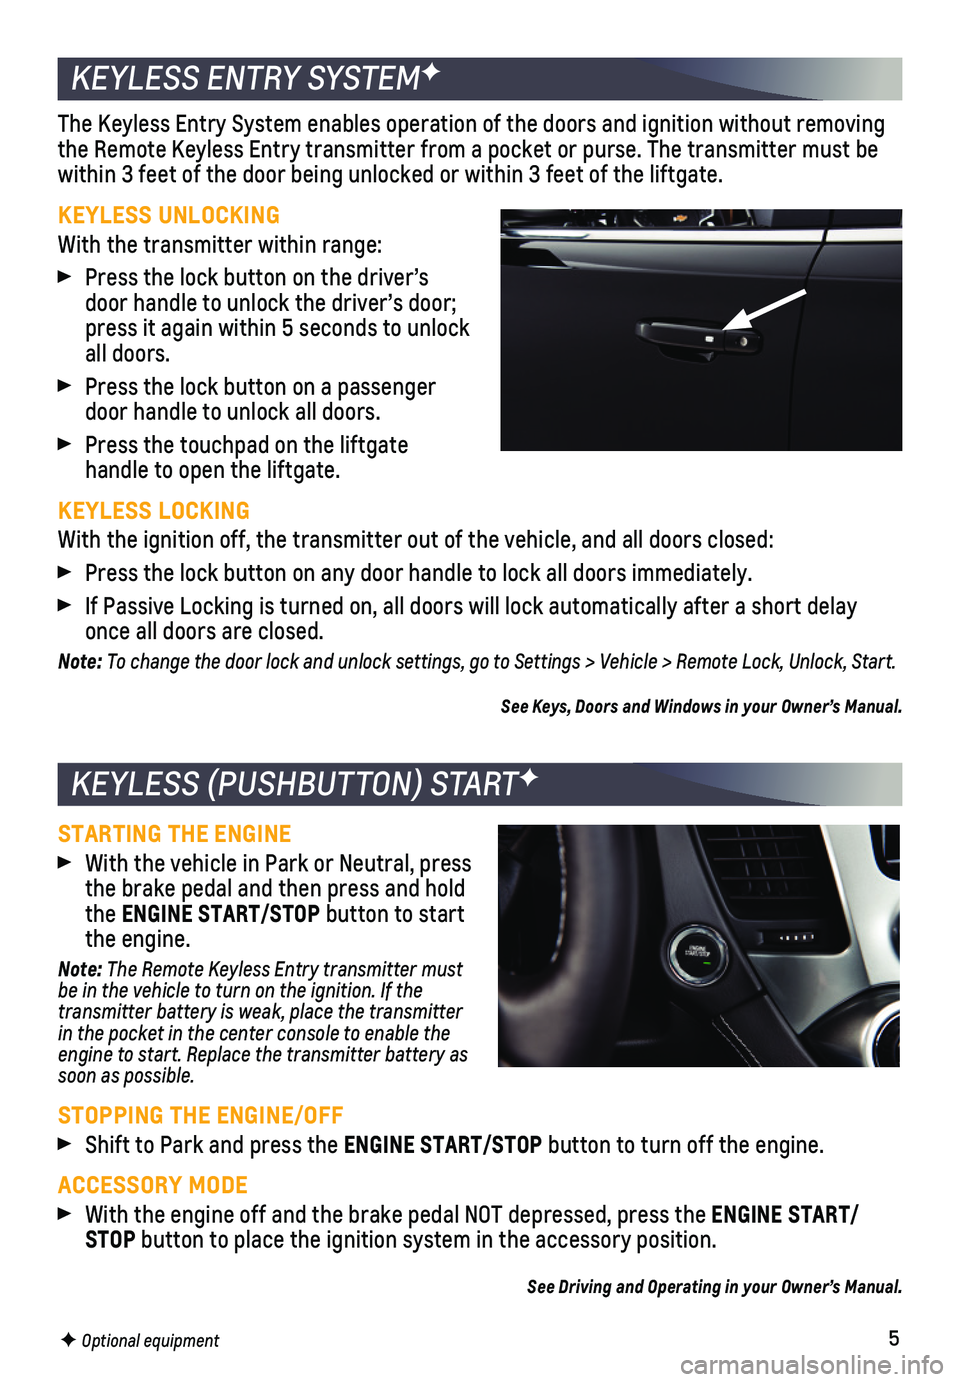 CHEVROLET SUBURBAN 2018  Get To Know Guide 5
STARTING THE ENGINE  
 With the vehicle in Park or Neutral, press the brake pedal and then press and hold the ENGINE START/STOP button to start the engine.
Note: The Remote Keyless Entry transmitter